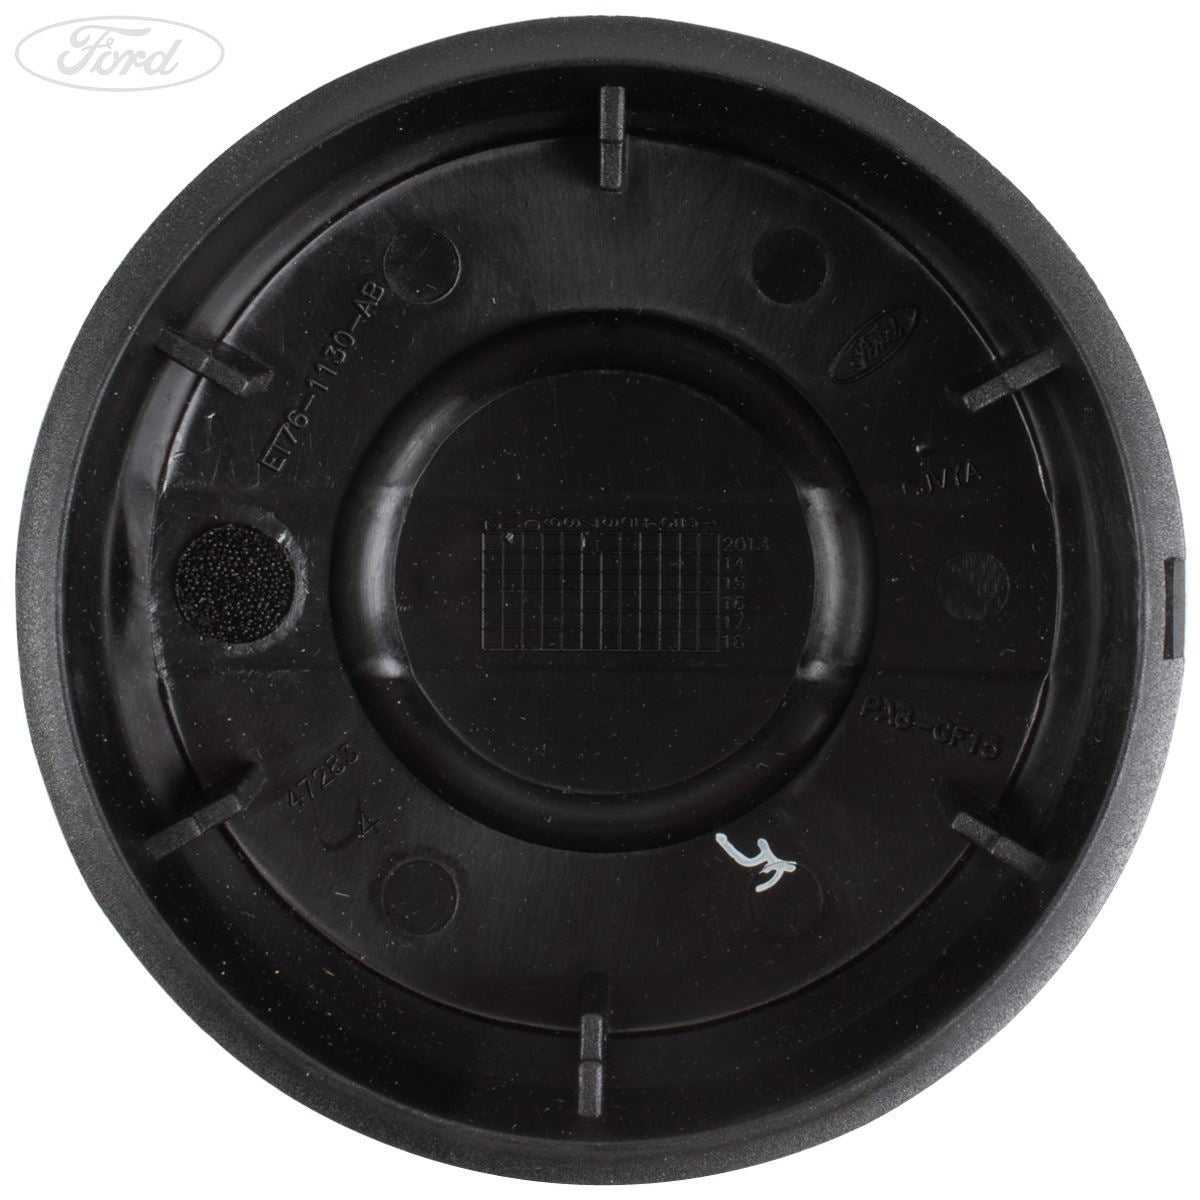 Ford, TRANSIT TOURNEO COURIER 15" STEEL WHEEL HUB NUT TRIM COVER